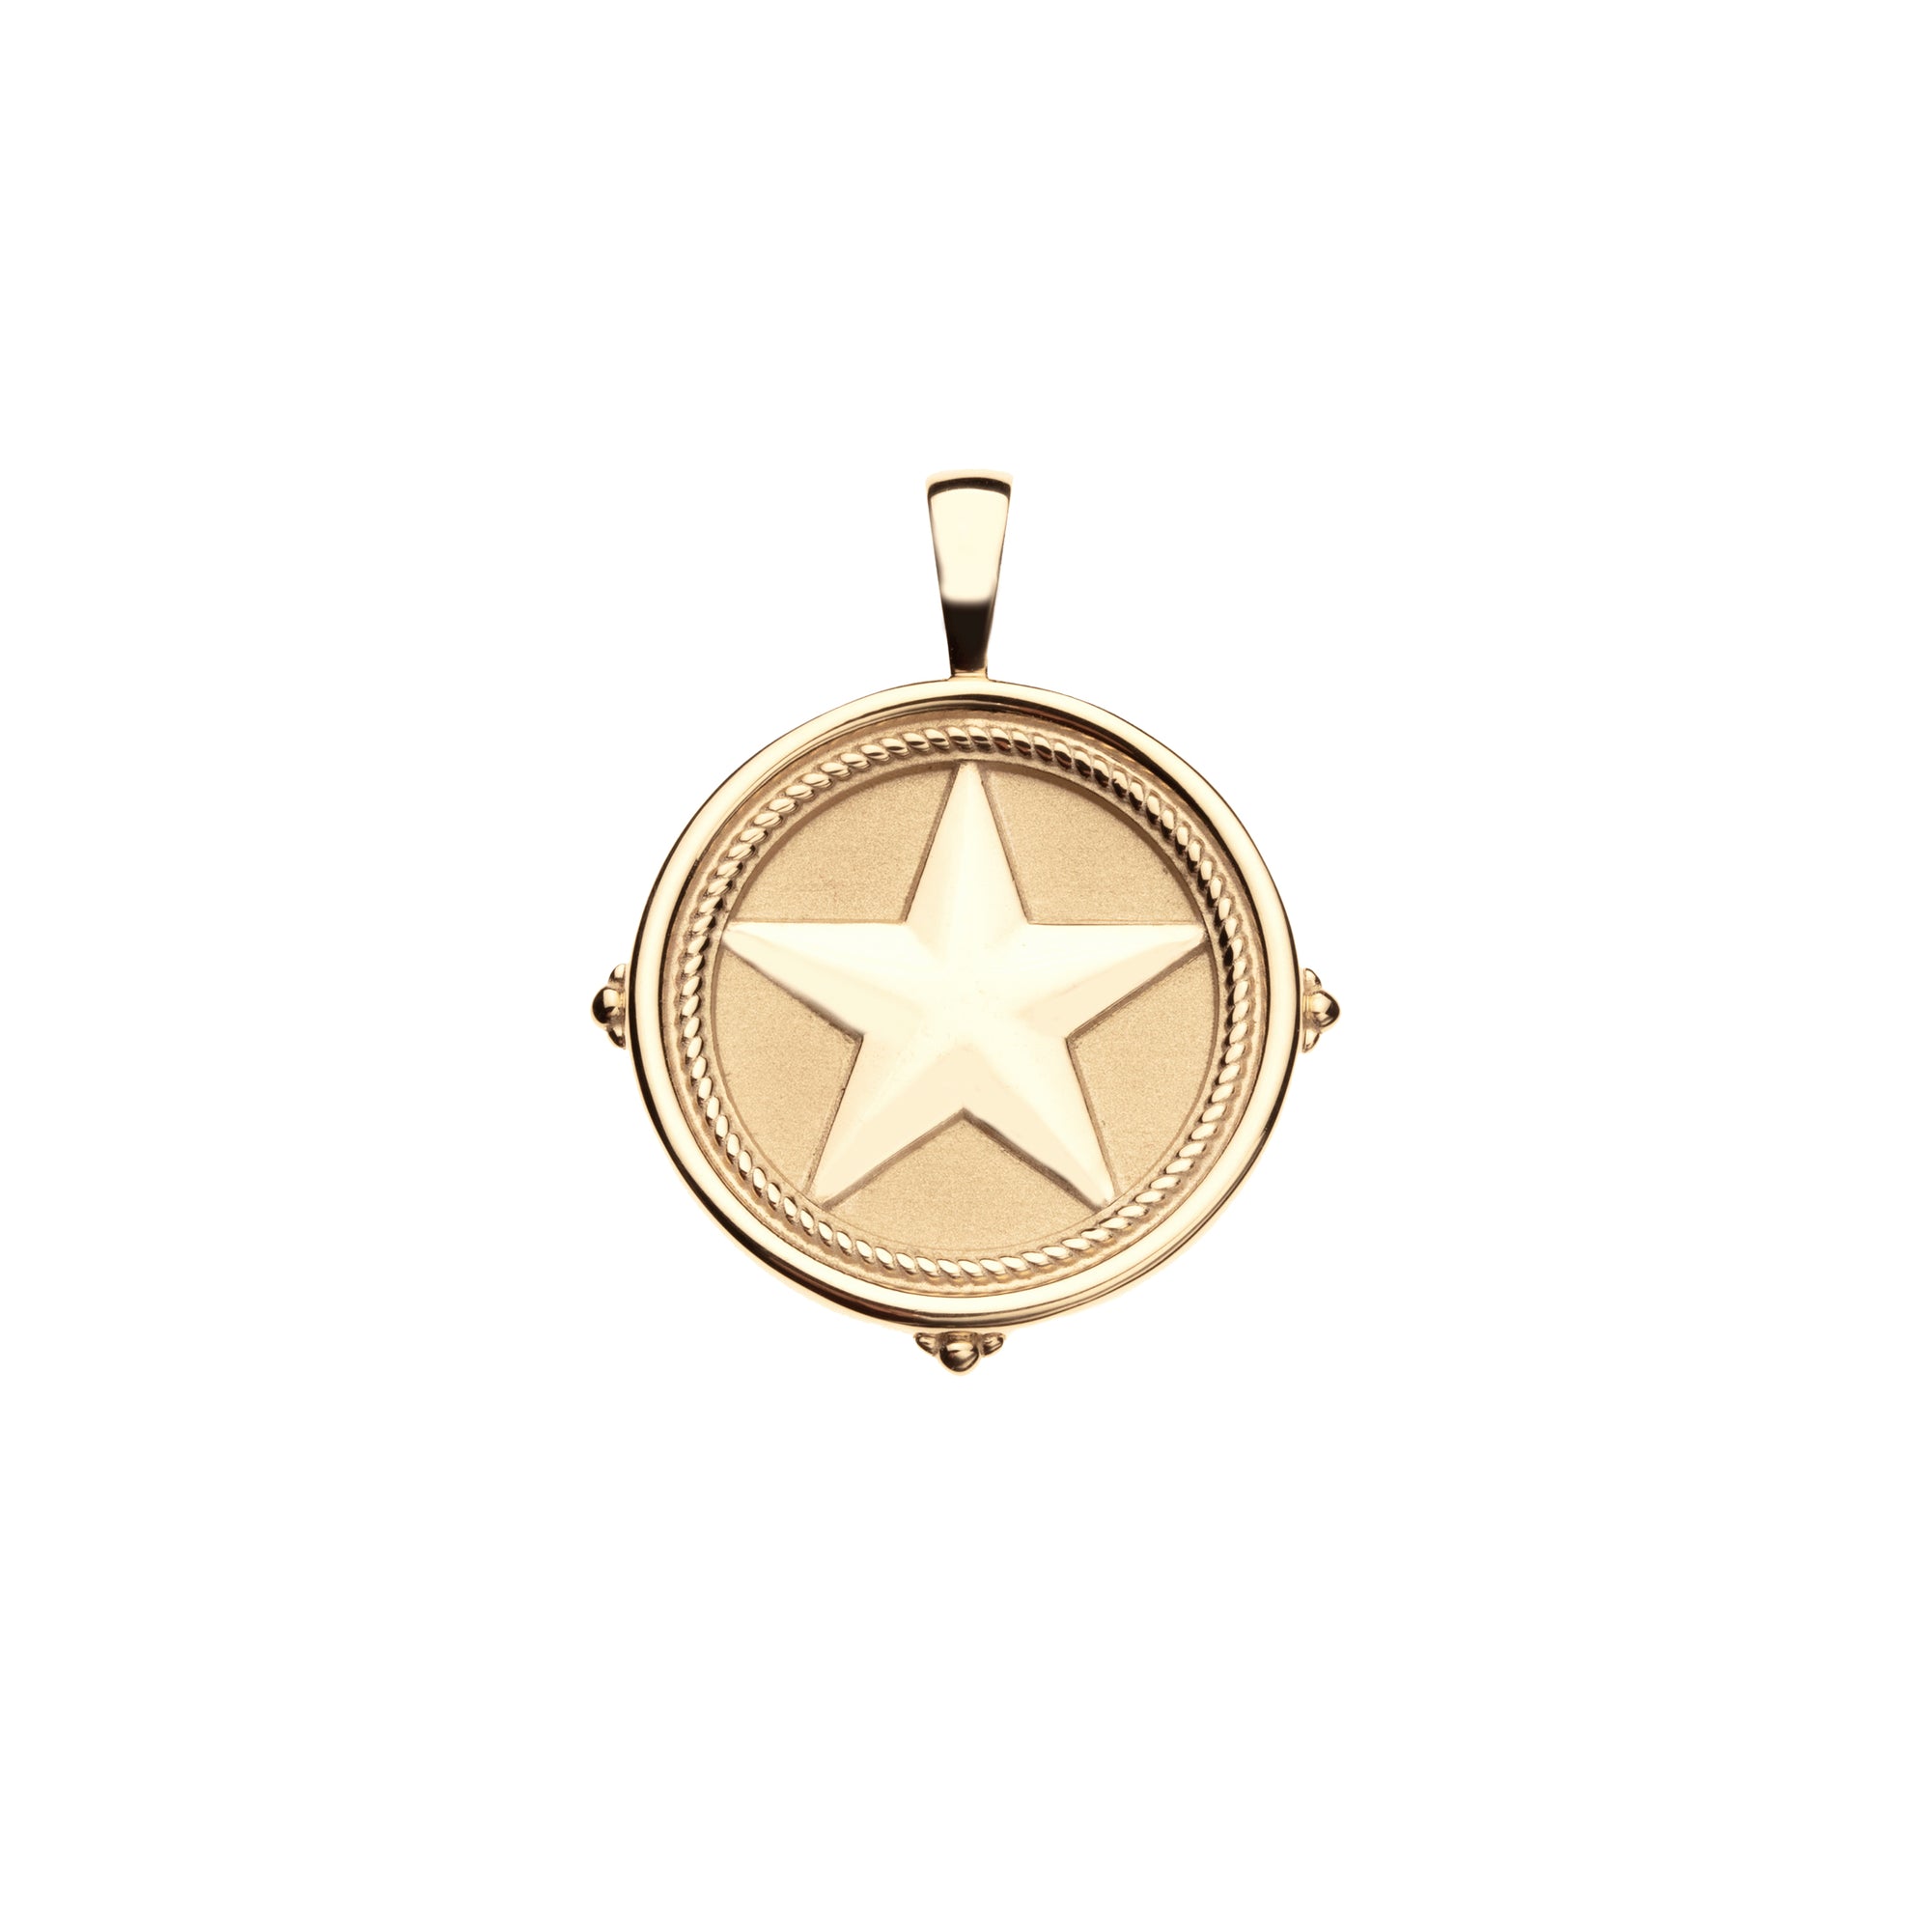 TEXAS JW Small Pendant Coin in Solid Gold